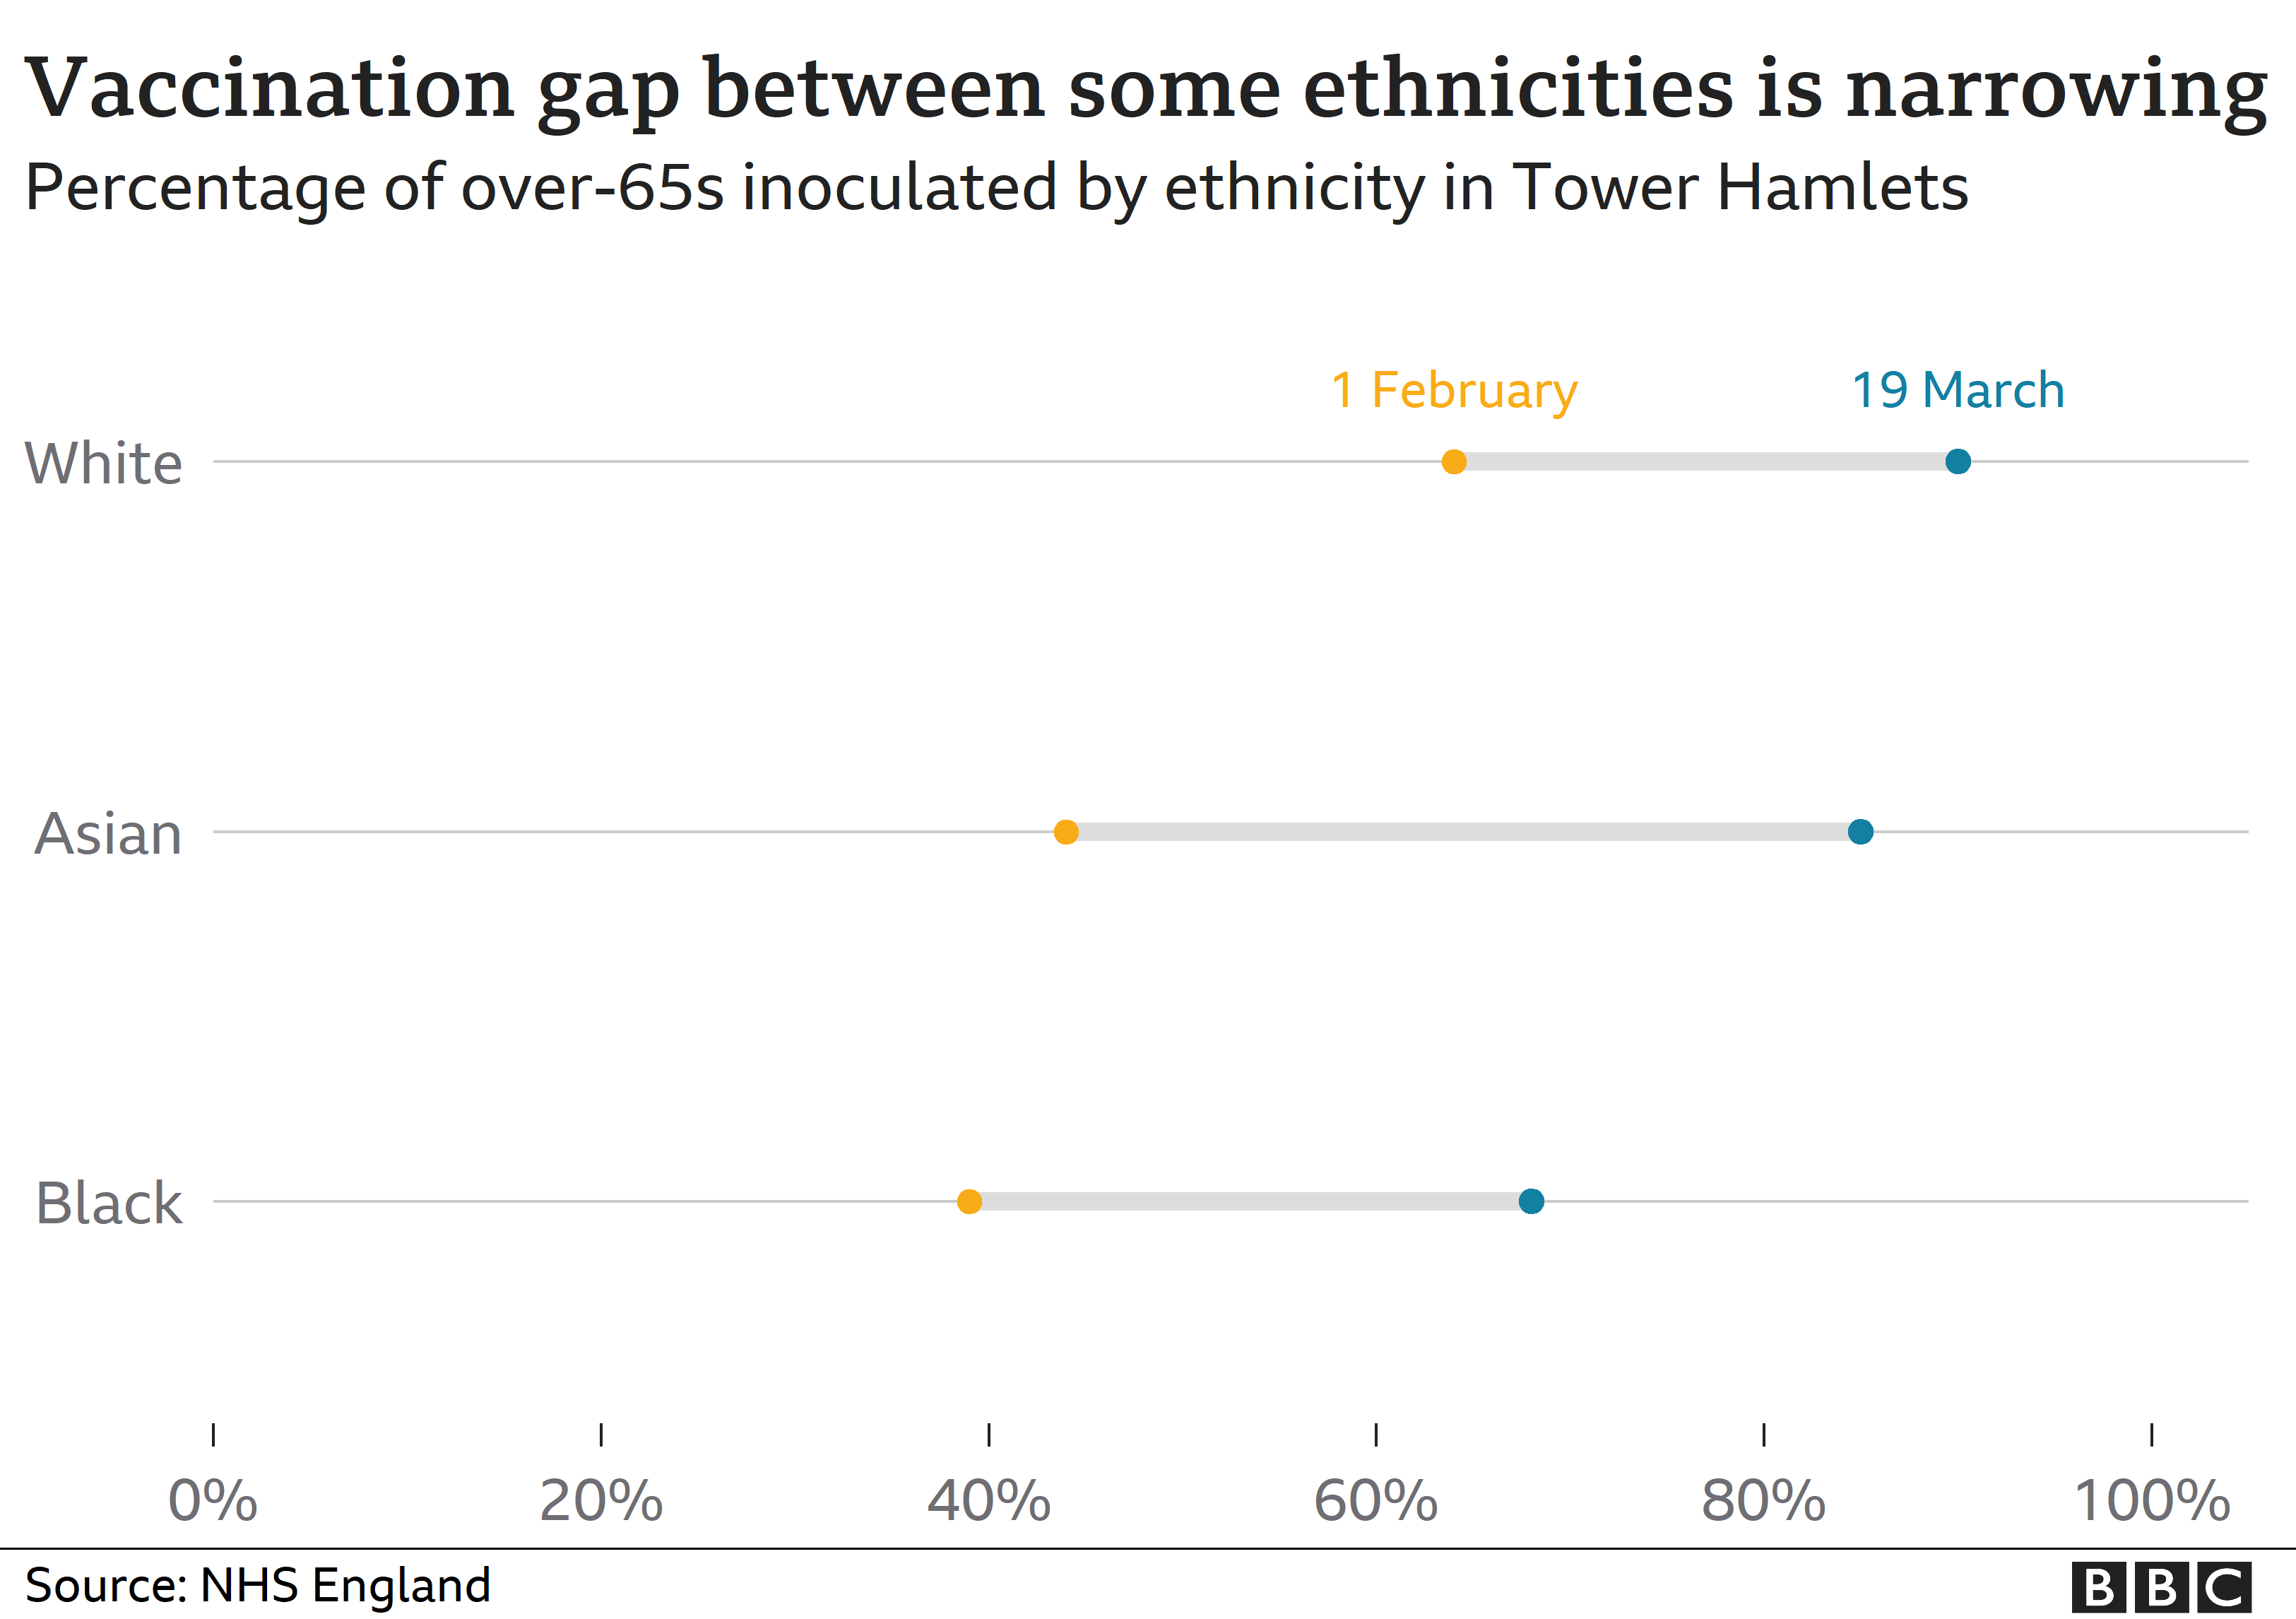 Chart showing the percentage of over-65s vaccinated in Tower Hamlets by ethnicity